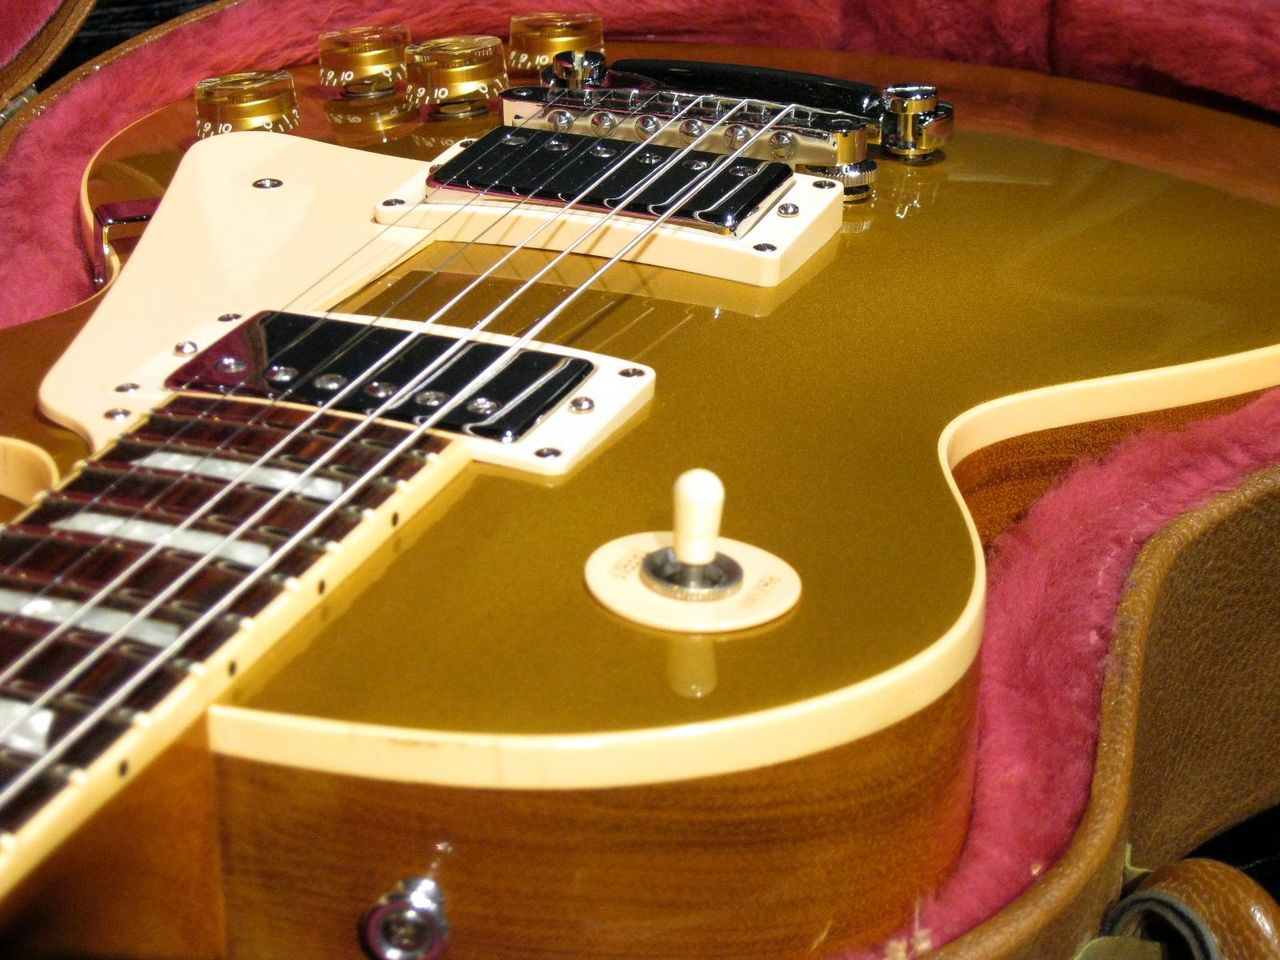 Gibson Les Paul Standard Gold Top Limited Edition（中古）【楽器